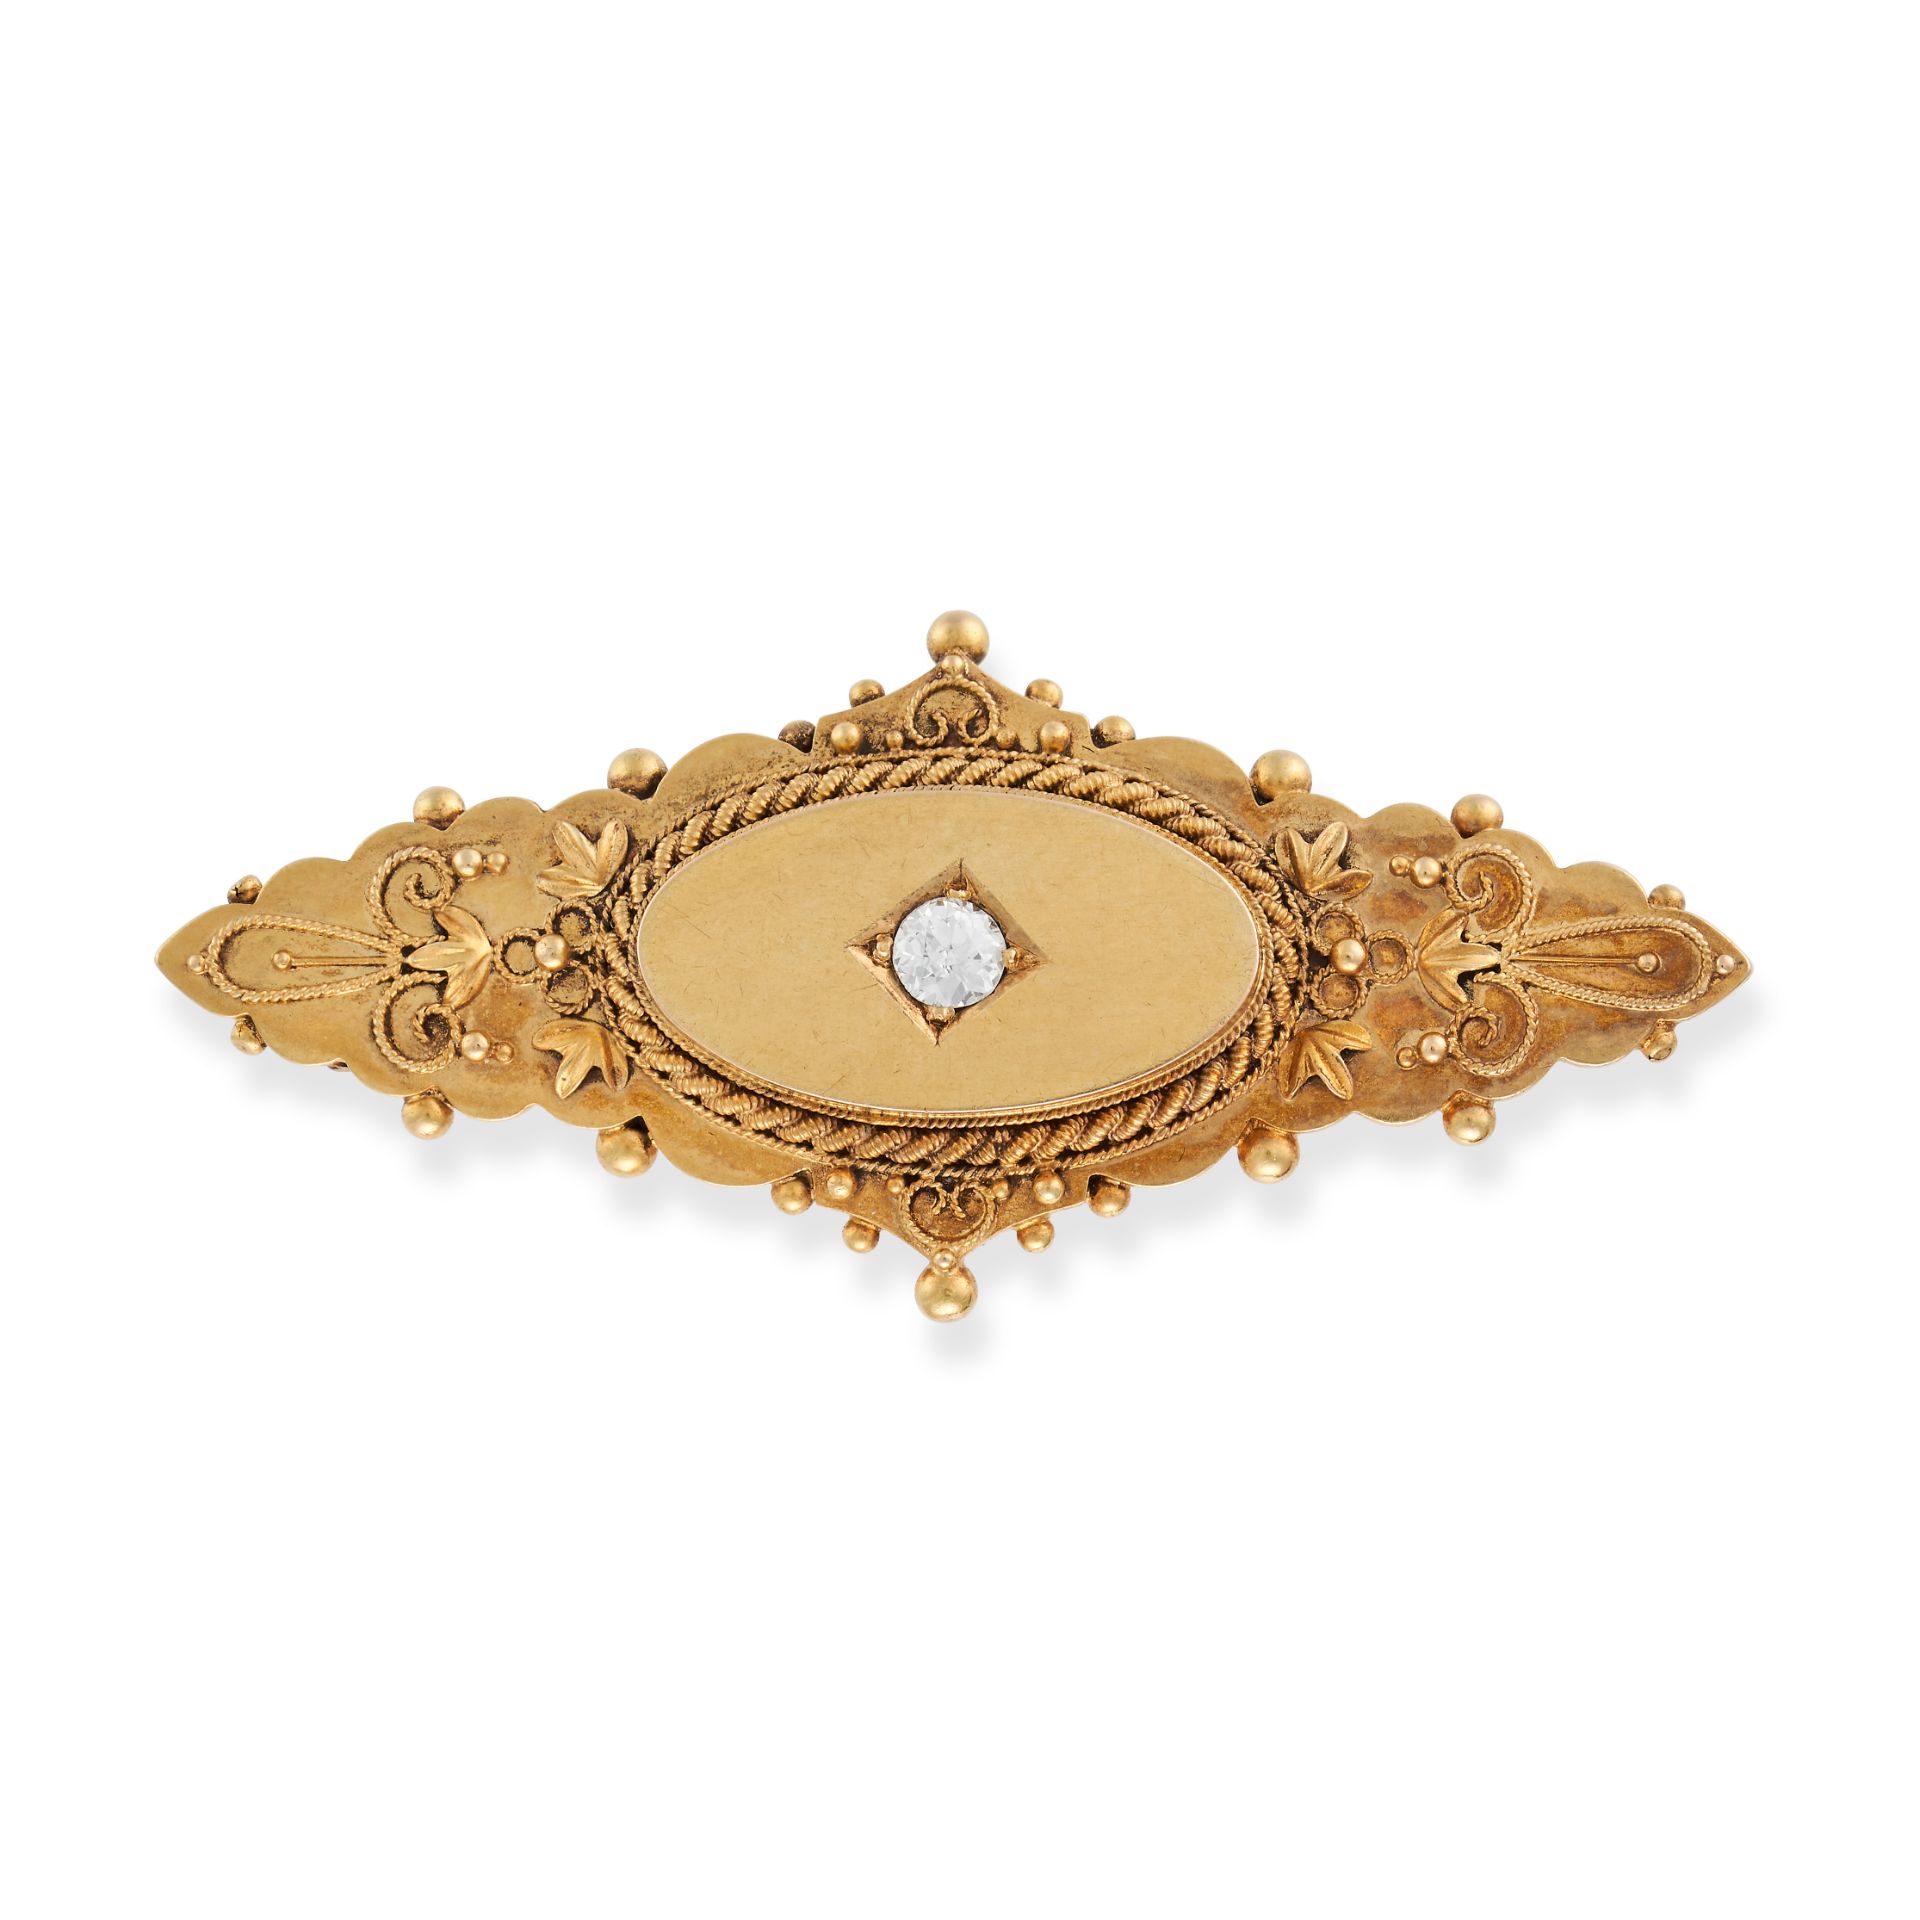 AN ANTIQUE ETRUSCAN REVIVAL DIAMOND BROOCH in 15ct yellow gold, set with an old cut diamond, glas...